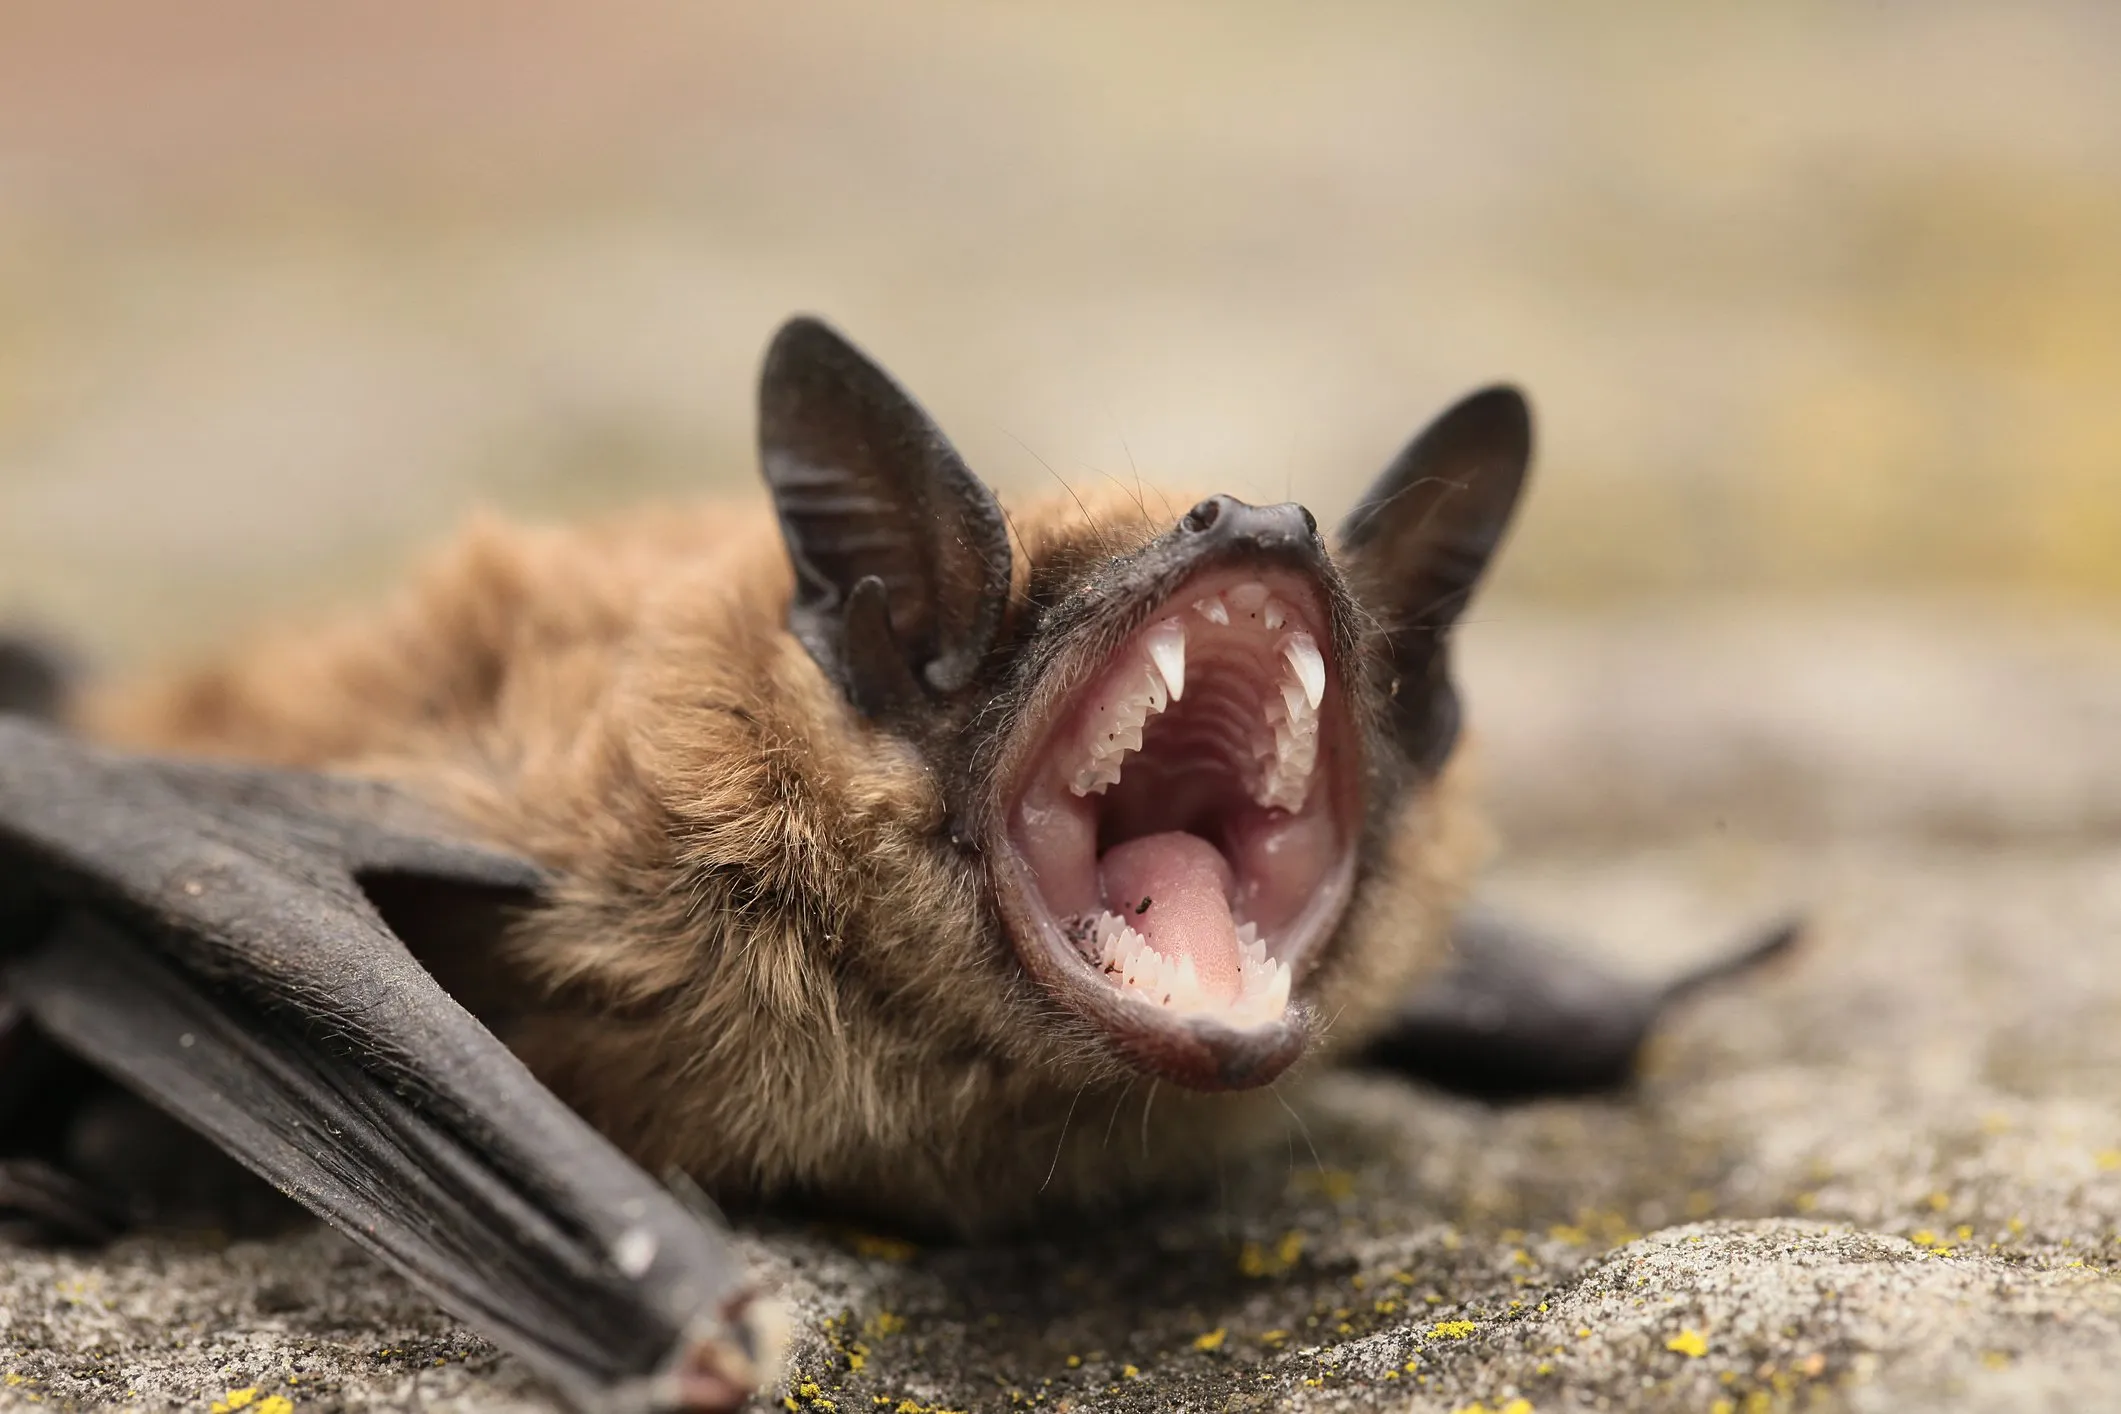 A small brown bat lays belly-down on a rock, it's head pointing upwards and mouth wide open as though screaming.